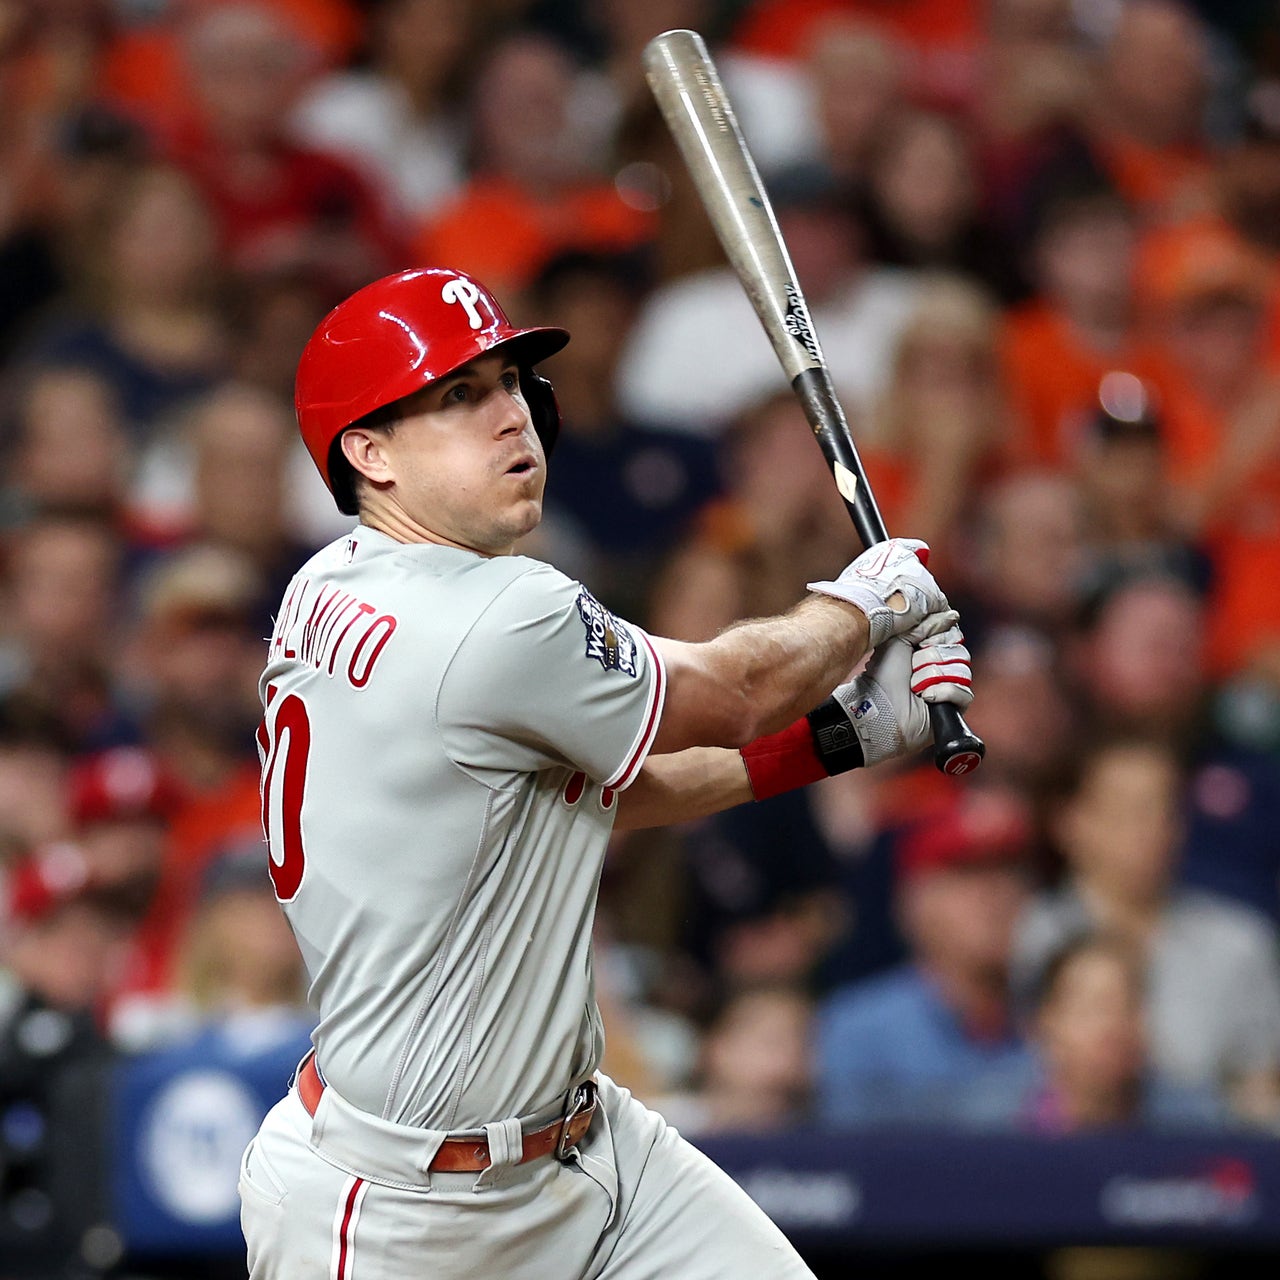 Philadelphia Phillies' J.T. Realmuto receives one of the most